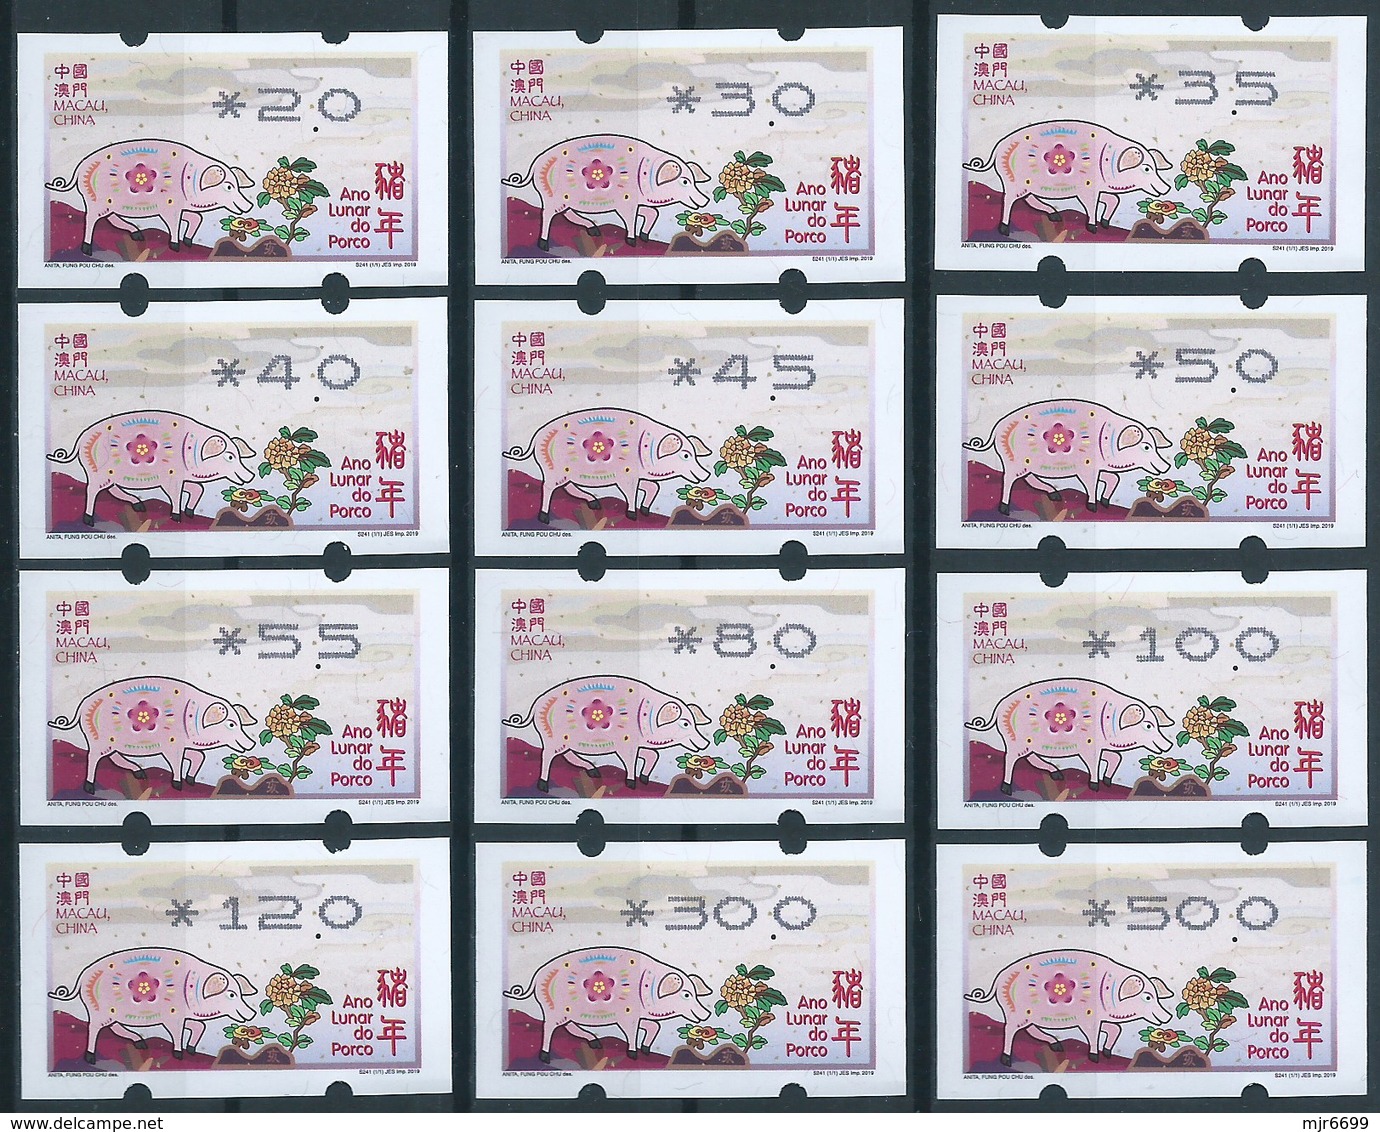 MACAU 2019 ZODIAC YEAR OF THE PIG ATM LABELS "NEW VISION" COMPLETE LARGE SET OF 12 VALUES - - Distributors